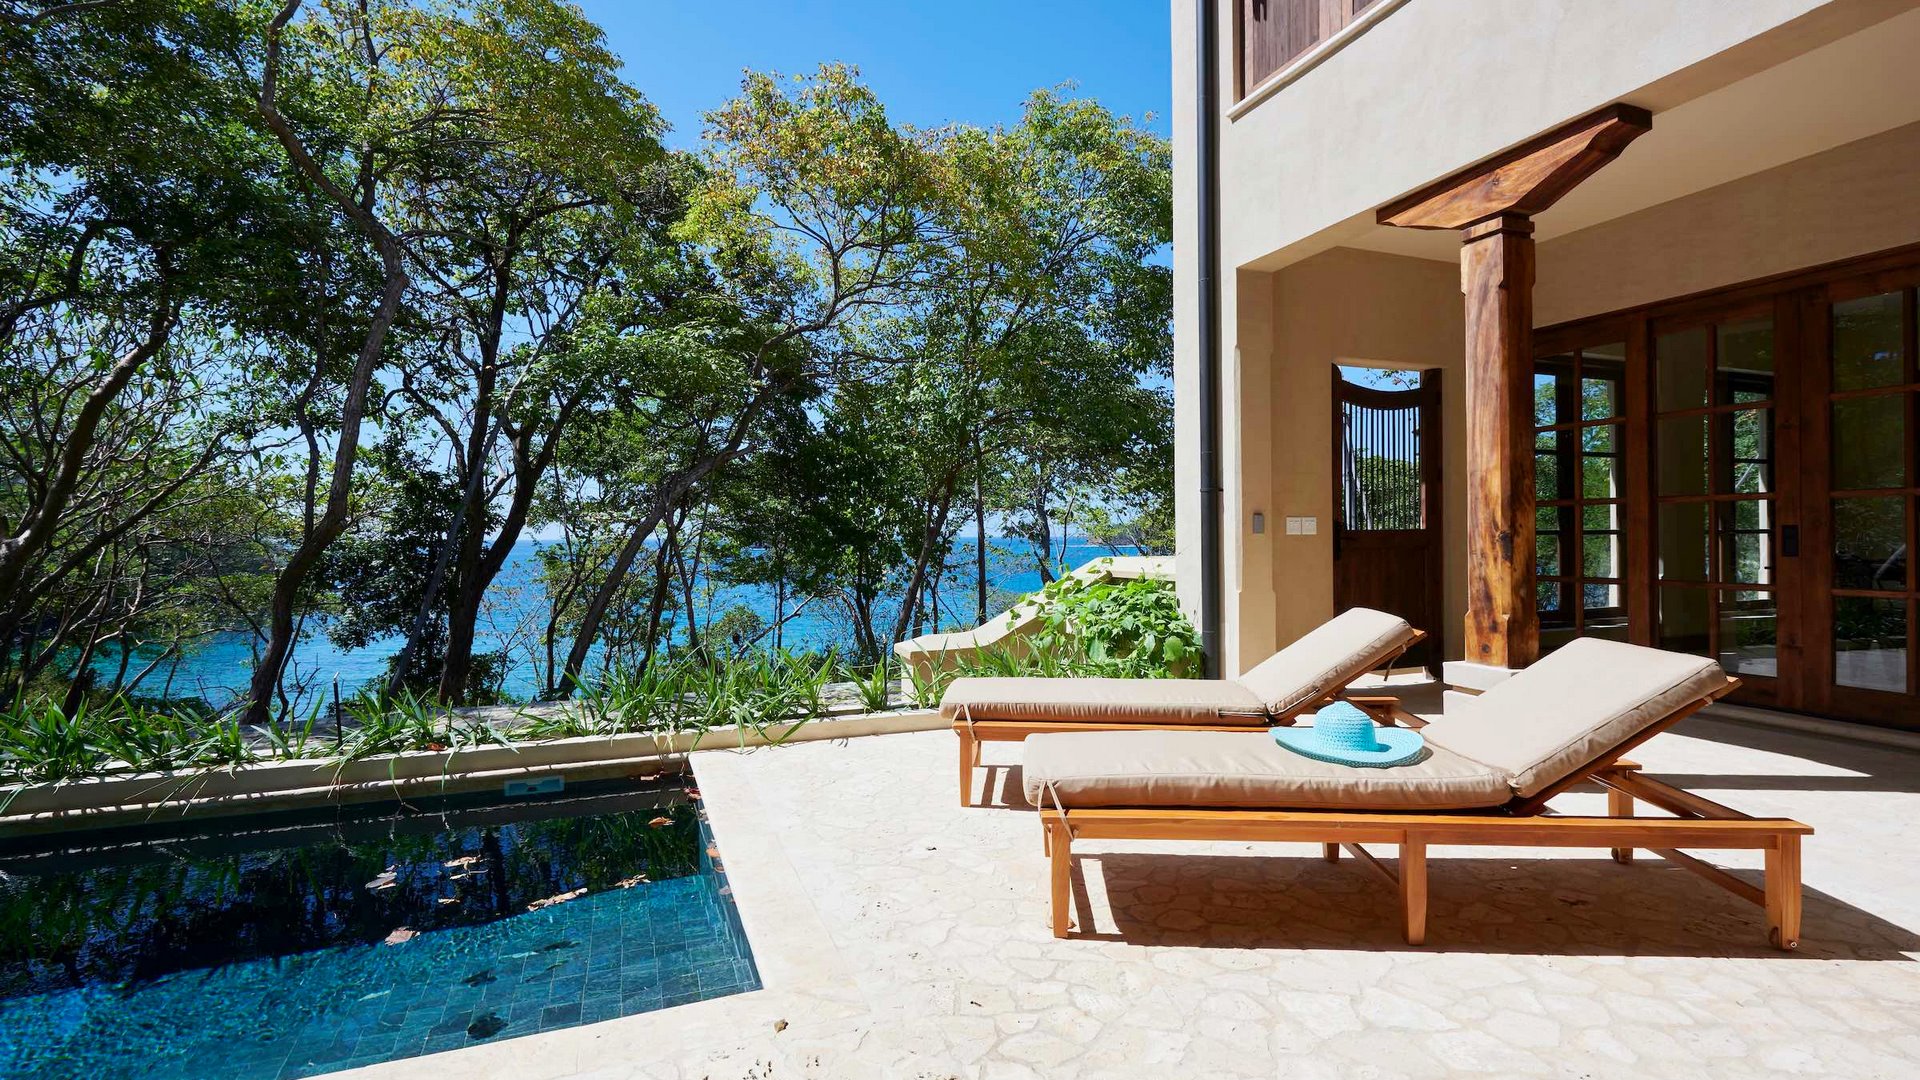 9874-The amazing views of the oceanfront home in Las Catalinas, Costa Rica